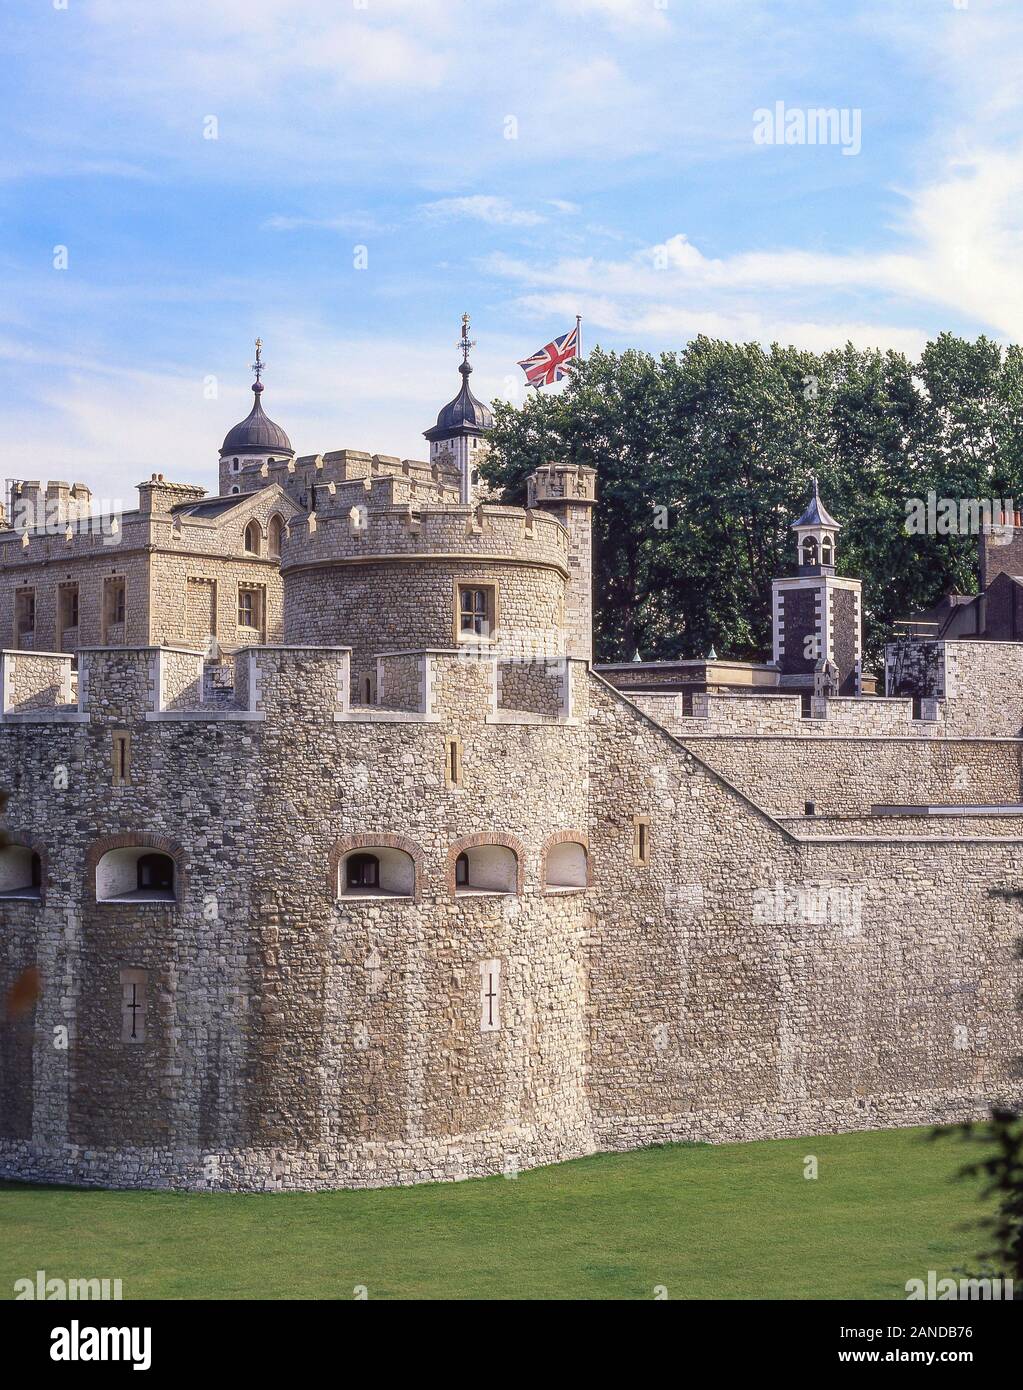 The outer walls of The Tower of London, Tower Hill, The London Borough of Tower Hamlets, Greater London, England, United Kingdom Stock Photo